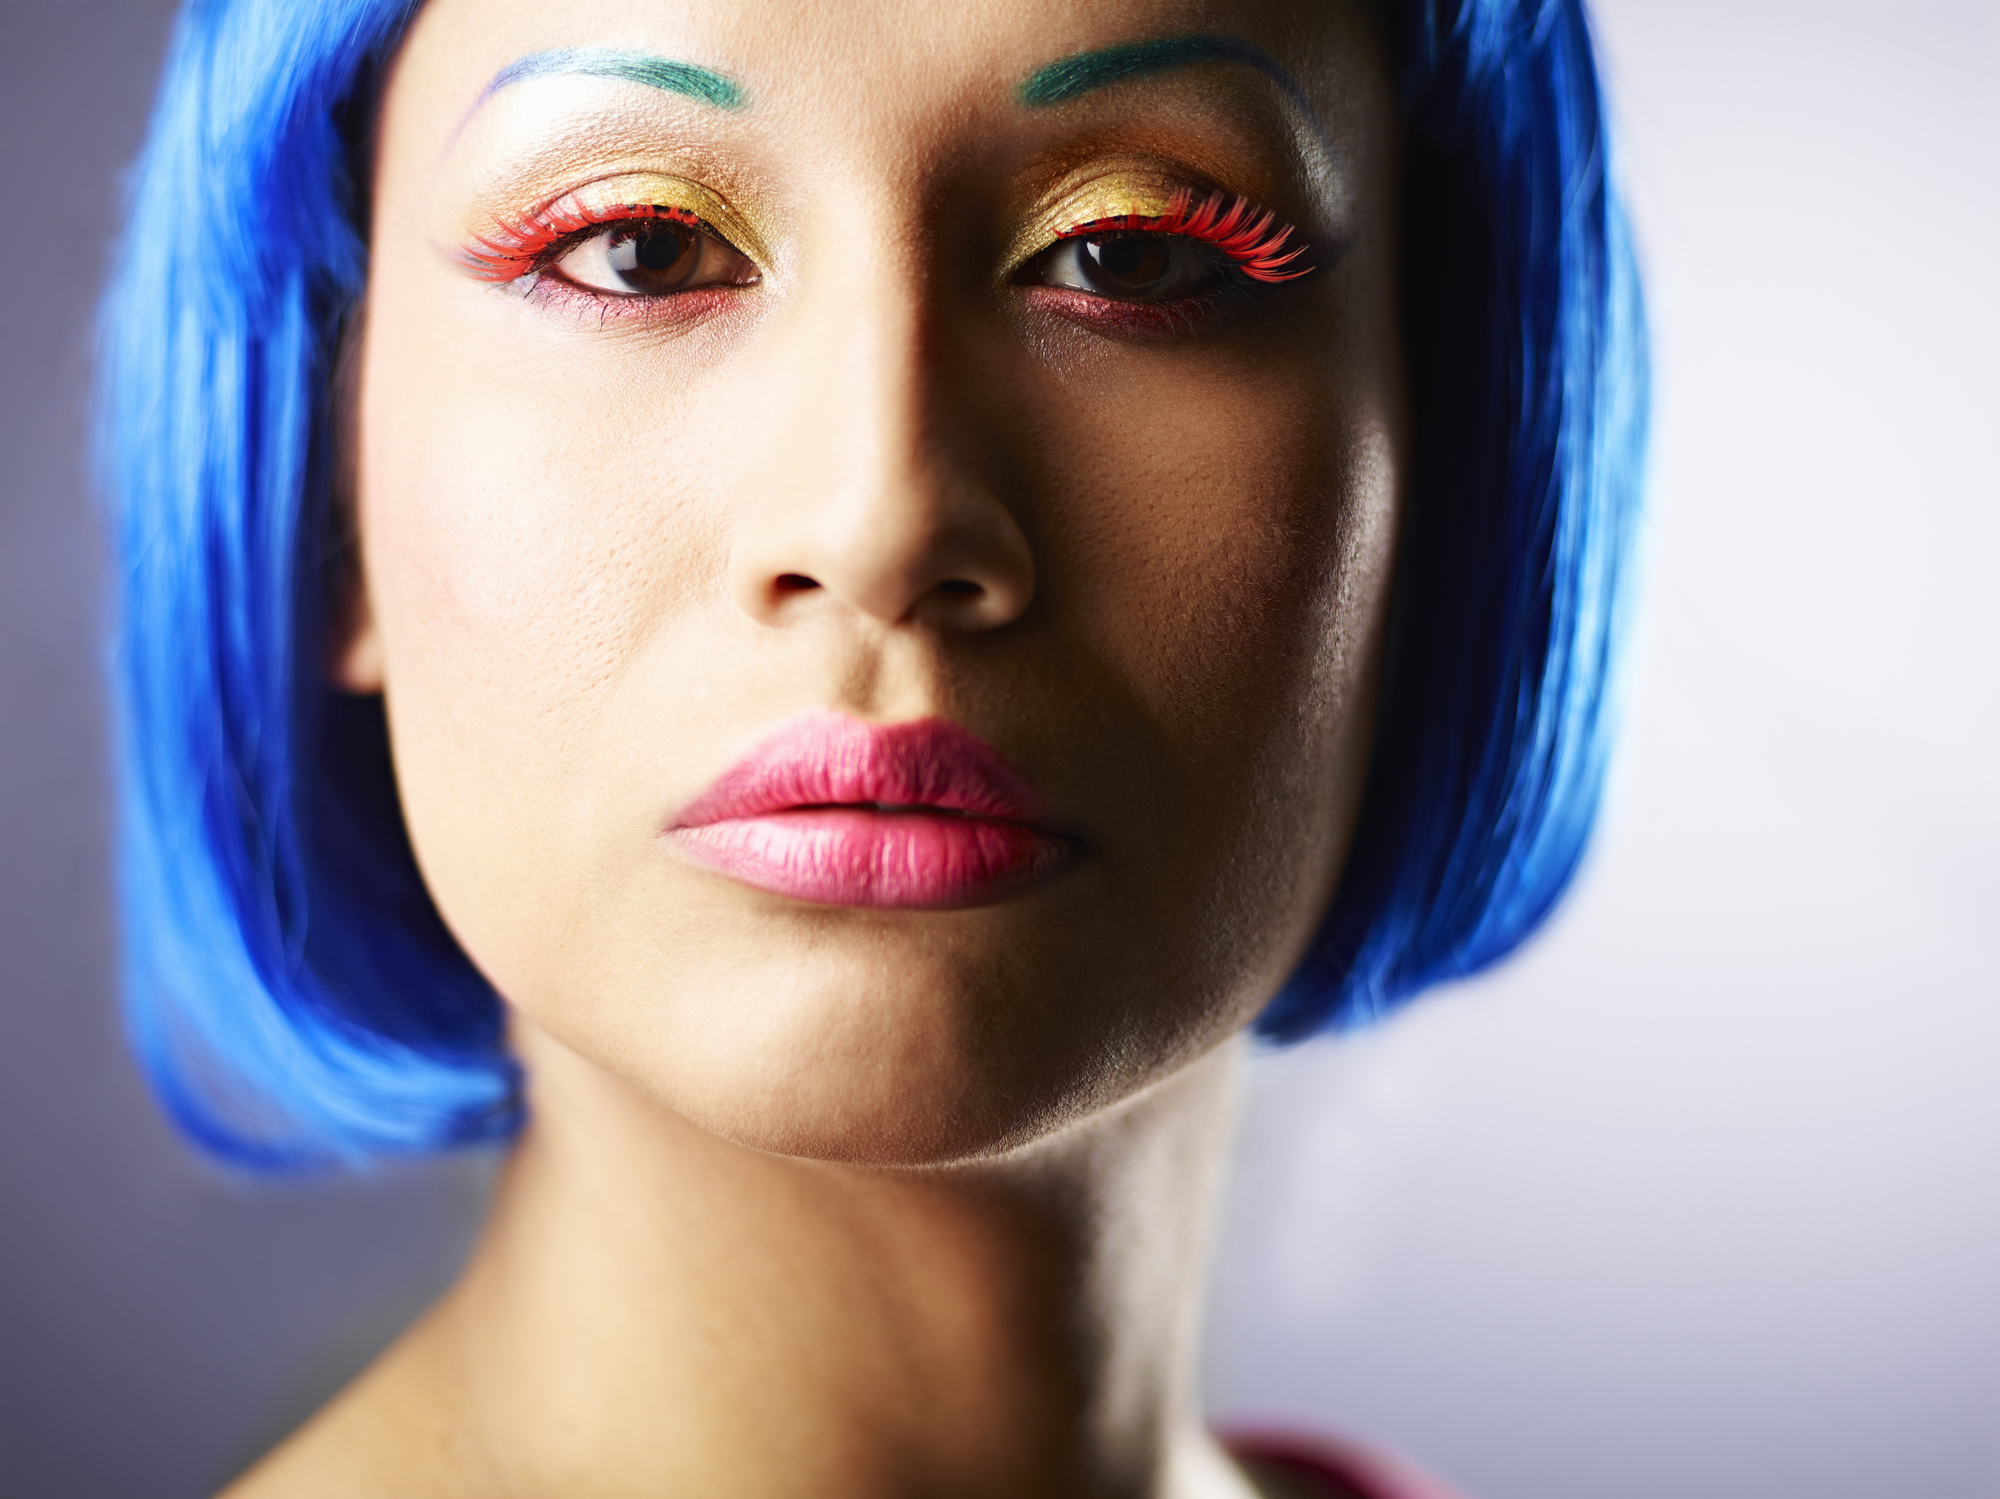 Young woman with dyed blue hair